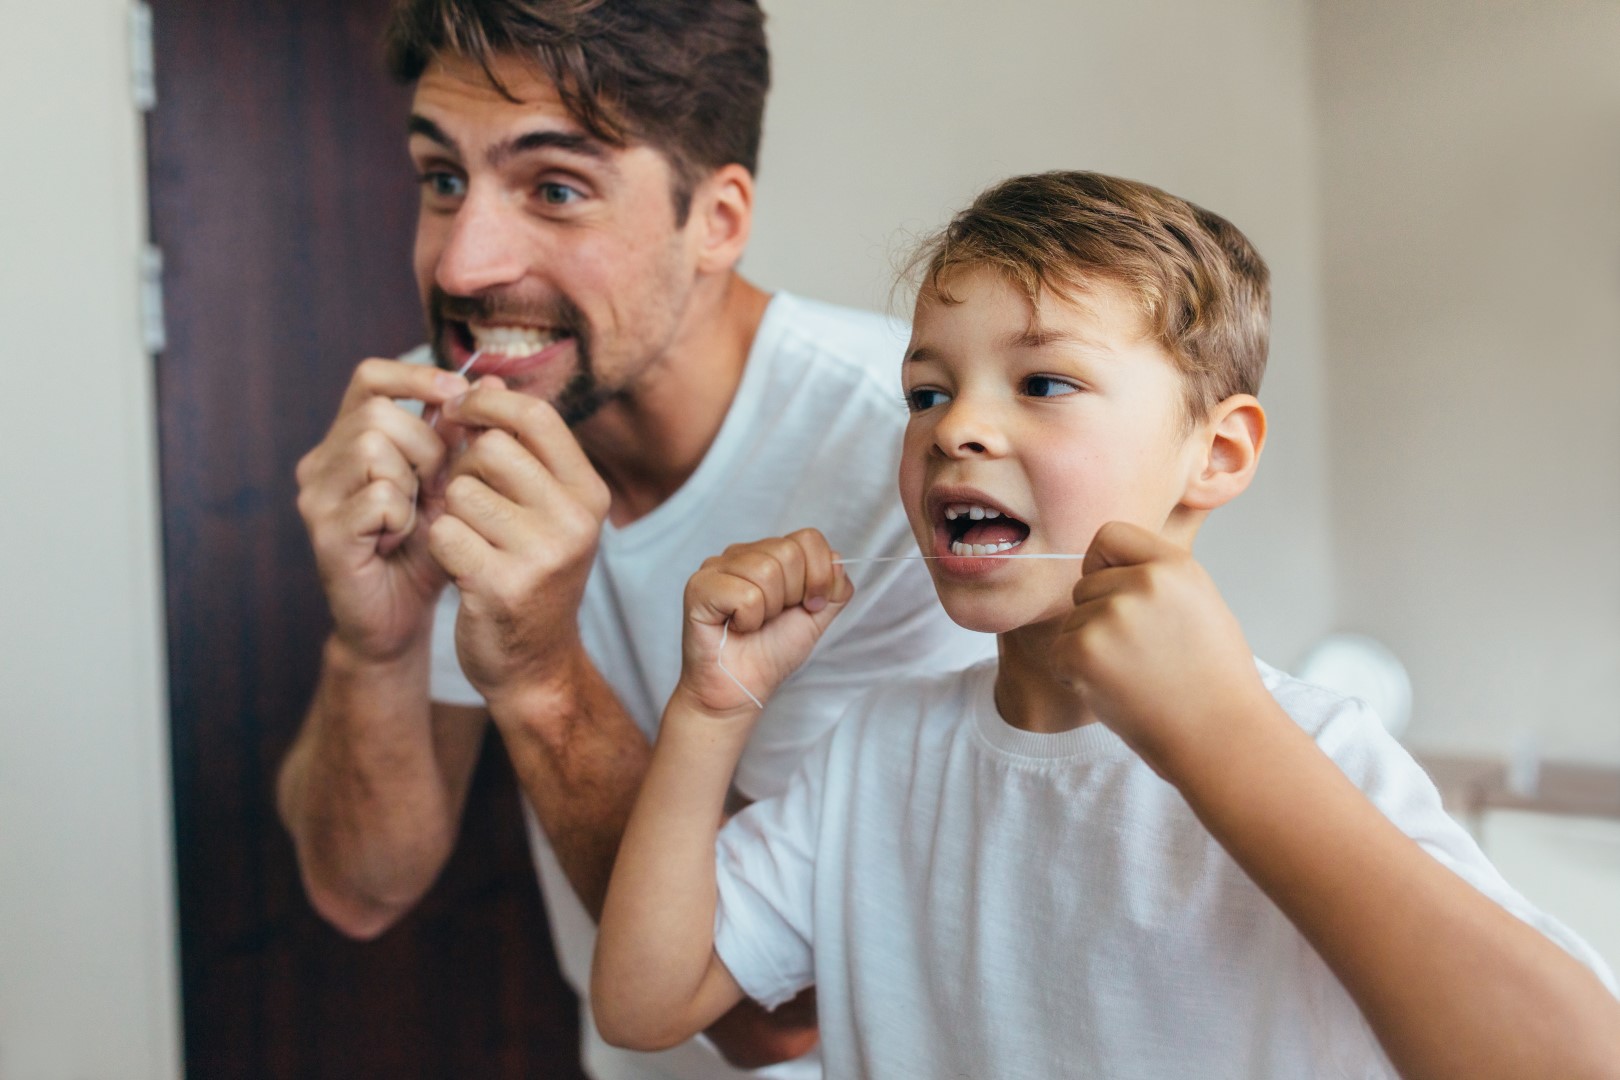 Father and son flossing together after visiting the GMHBA Dental Care practice